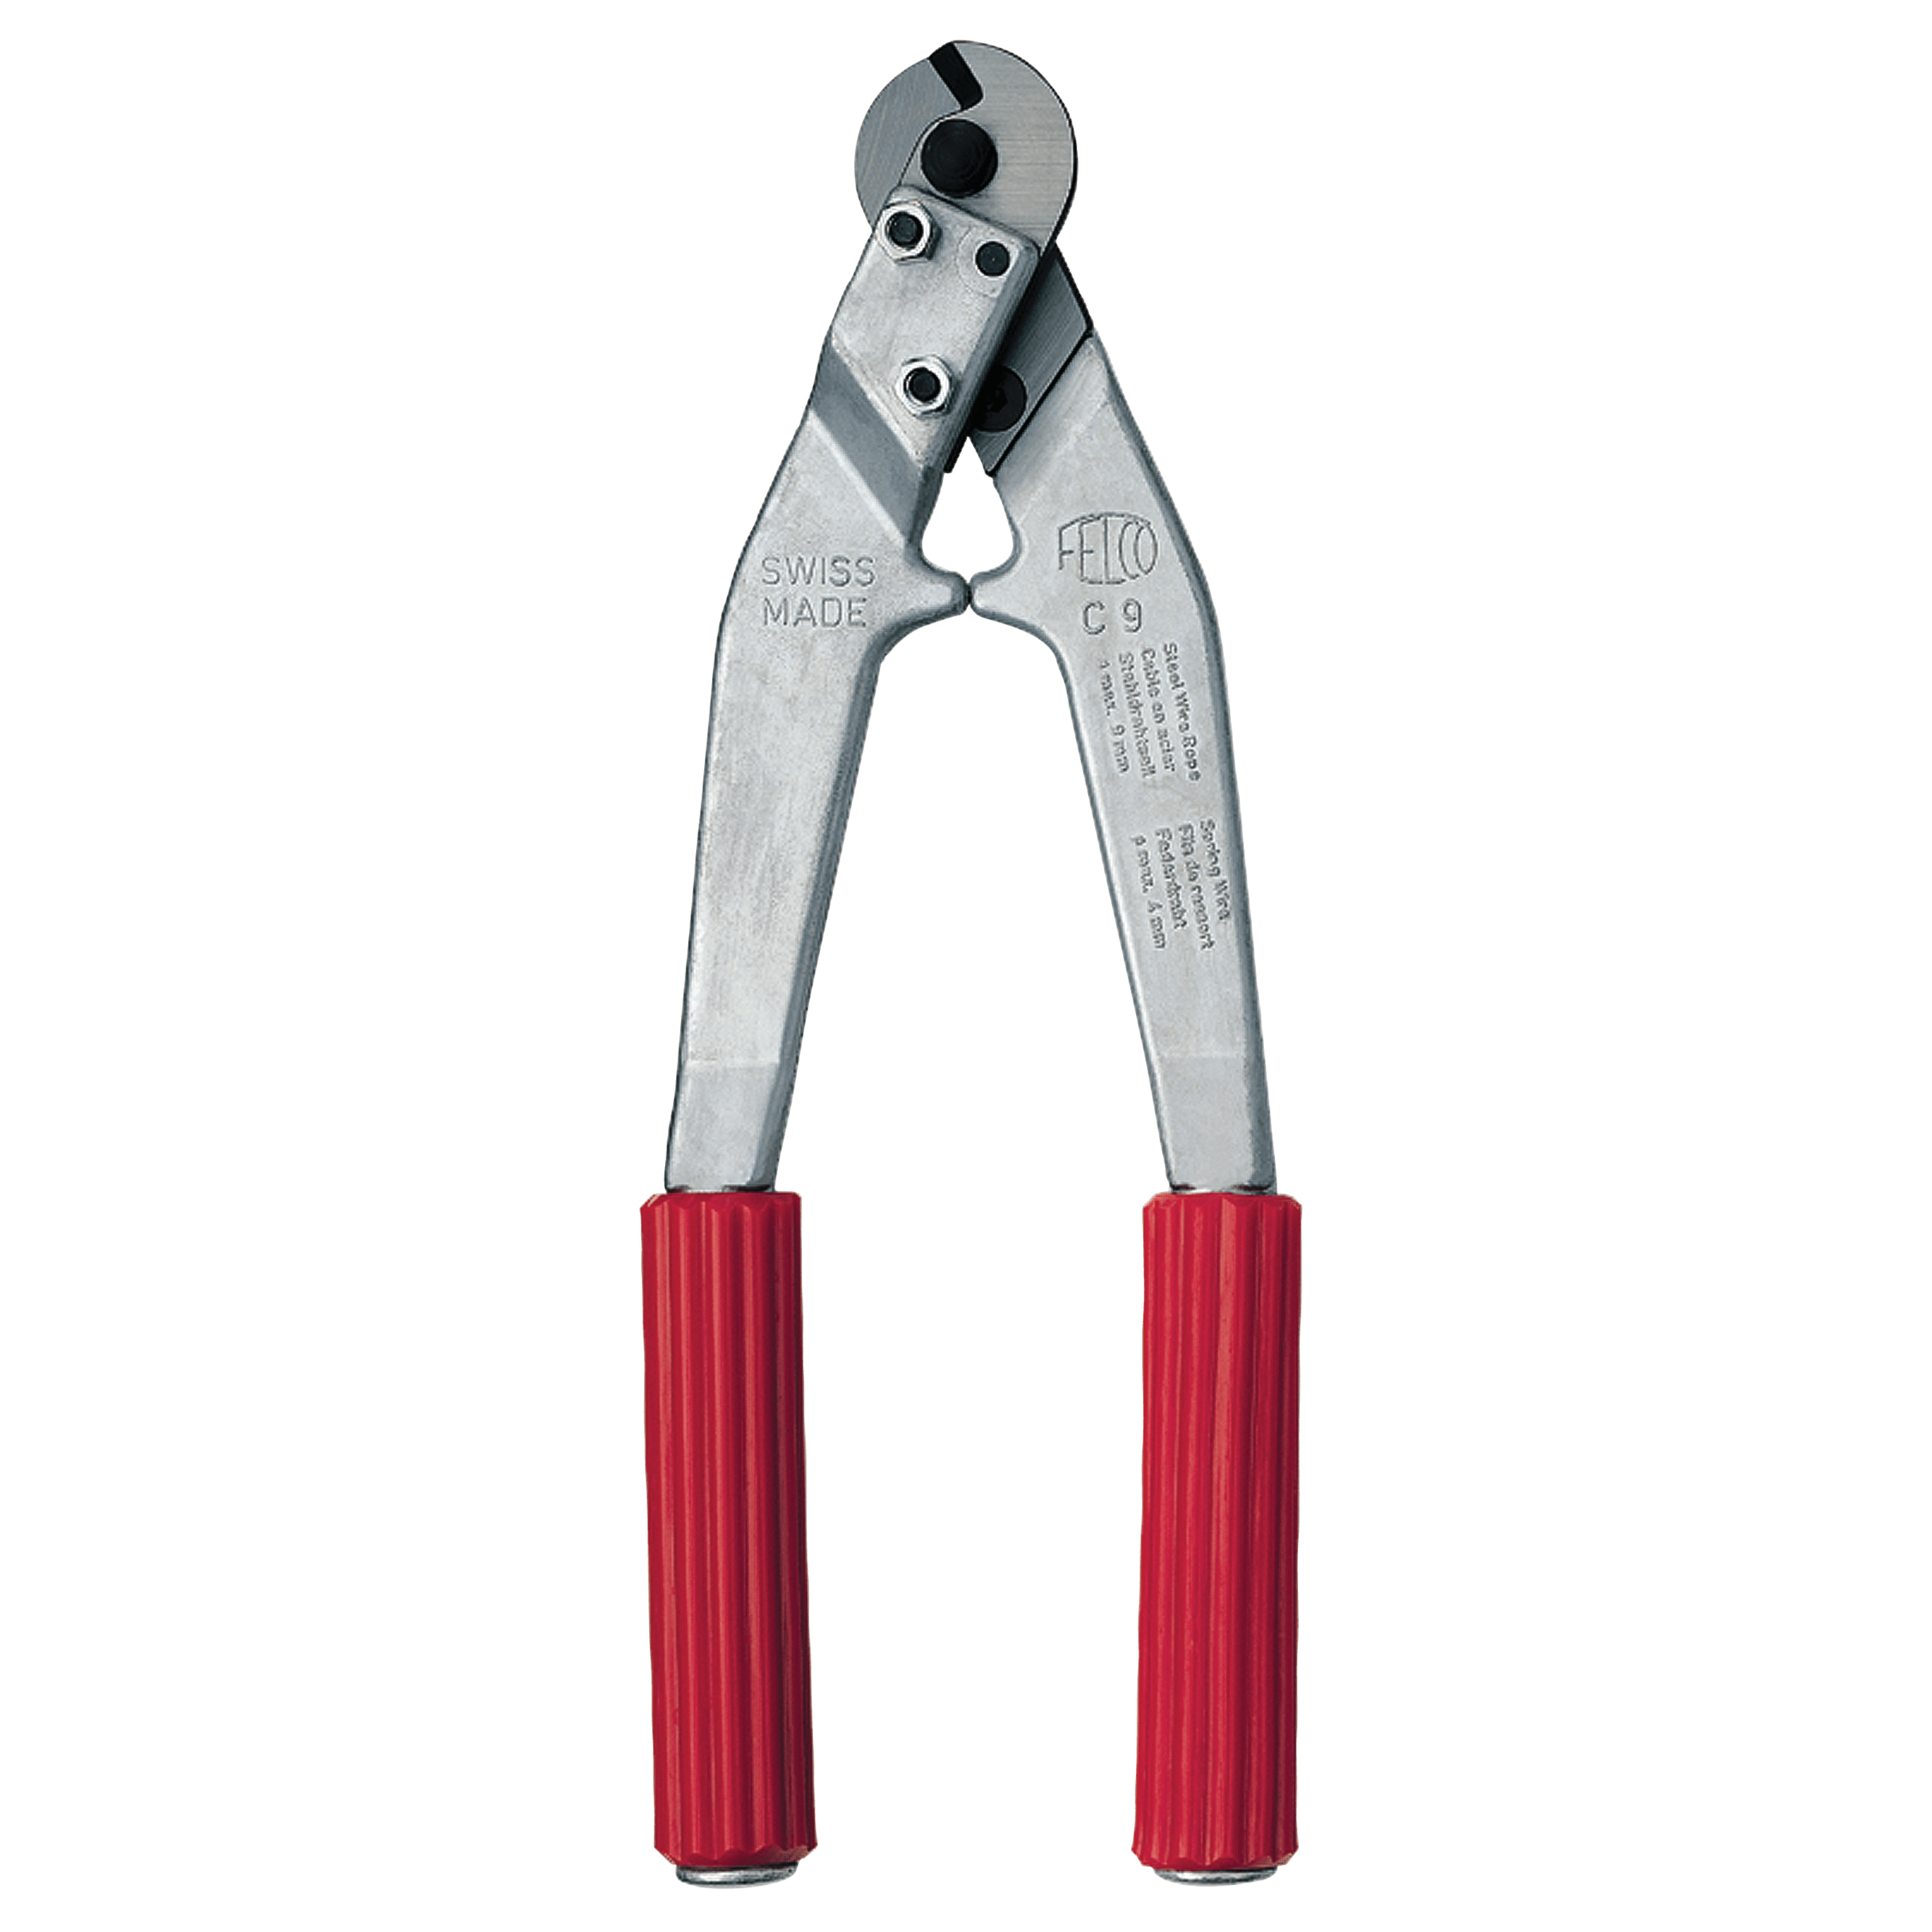 Felco C9 Wire & Cable Cutter